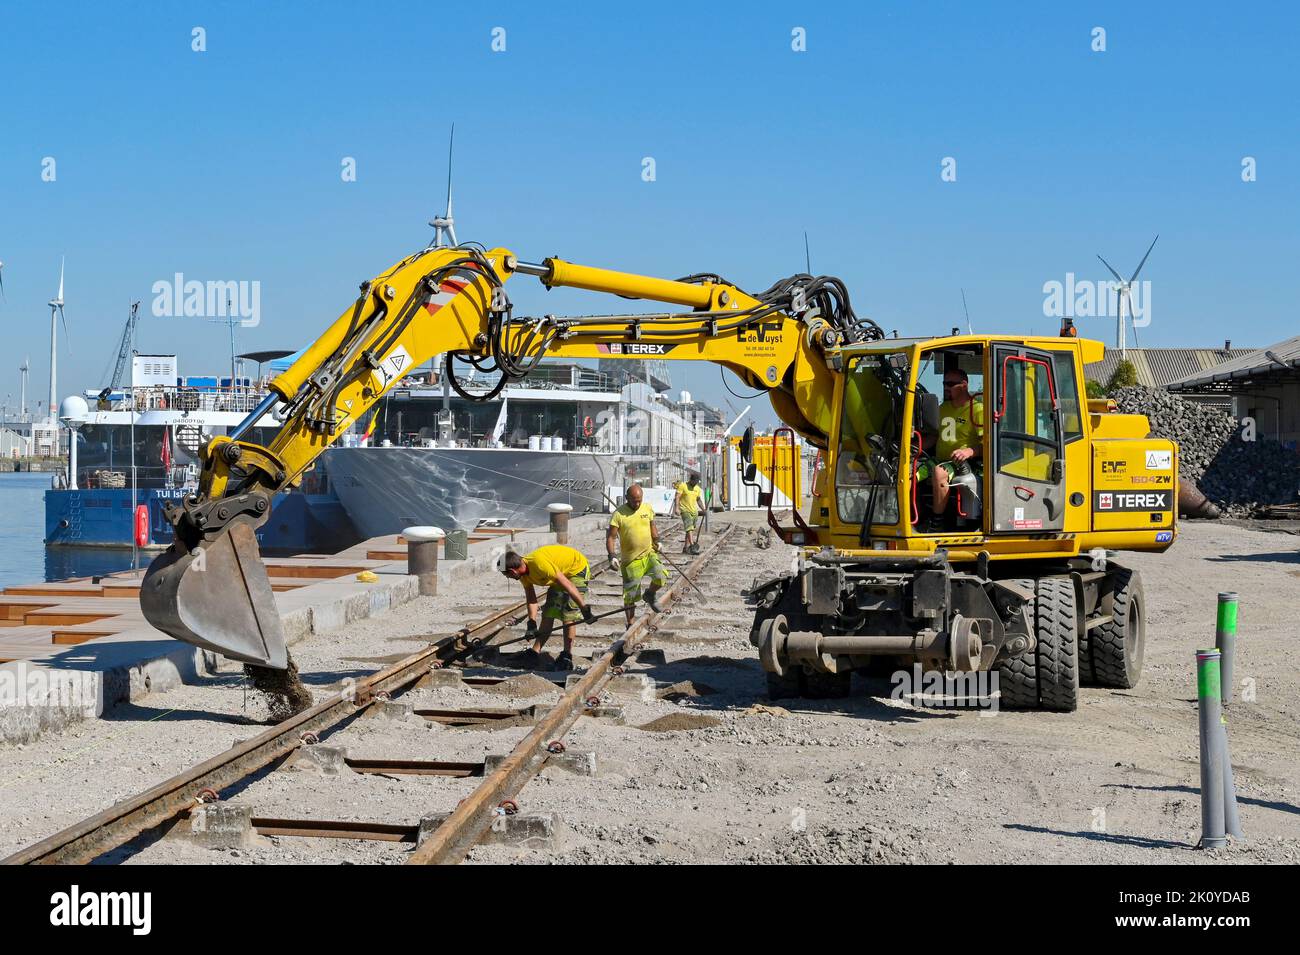 Antwerp, Belgium - August 2022: Mechanical digger working on a construction site alongside one of the city's harbours Stock Photo